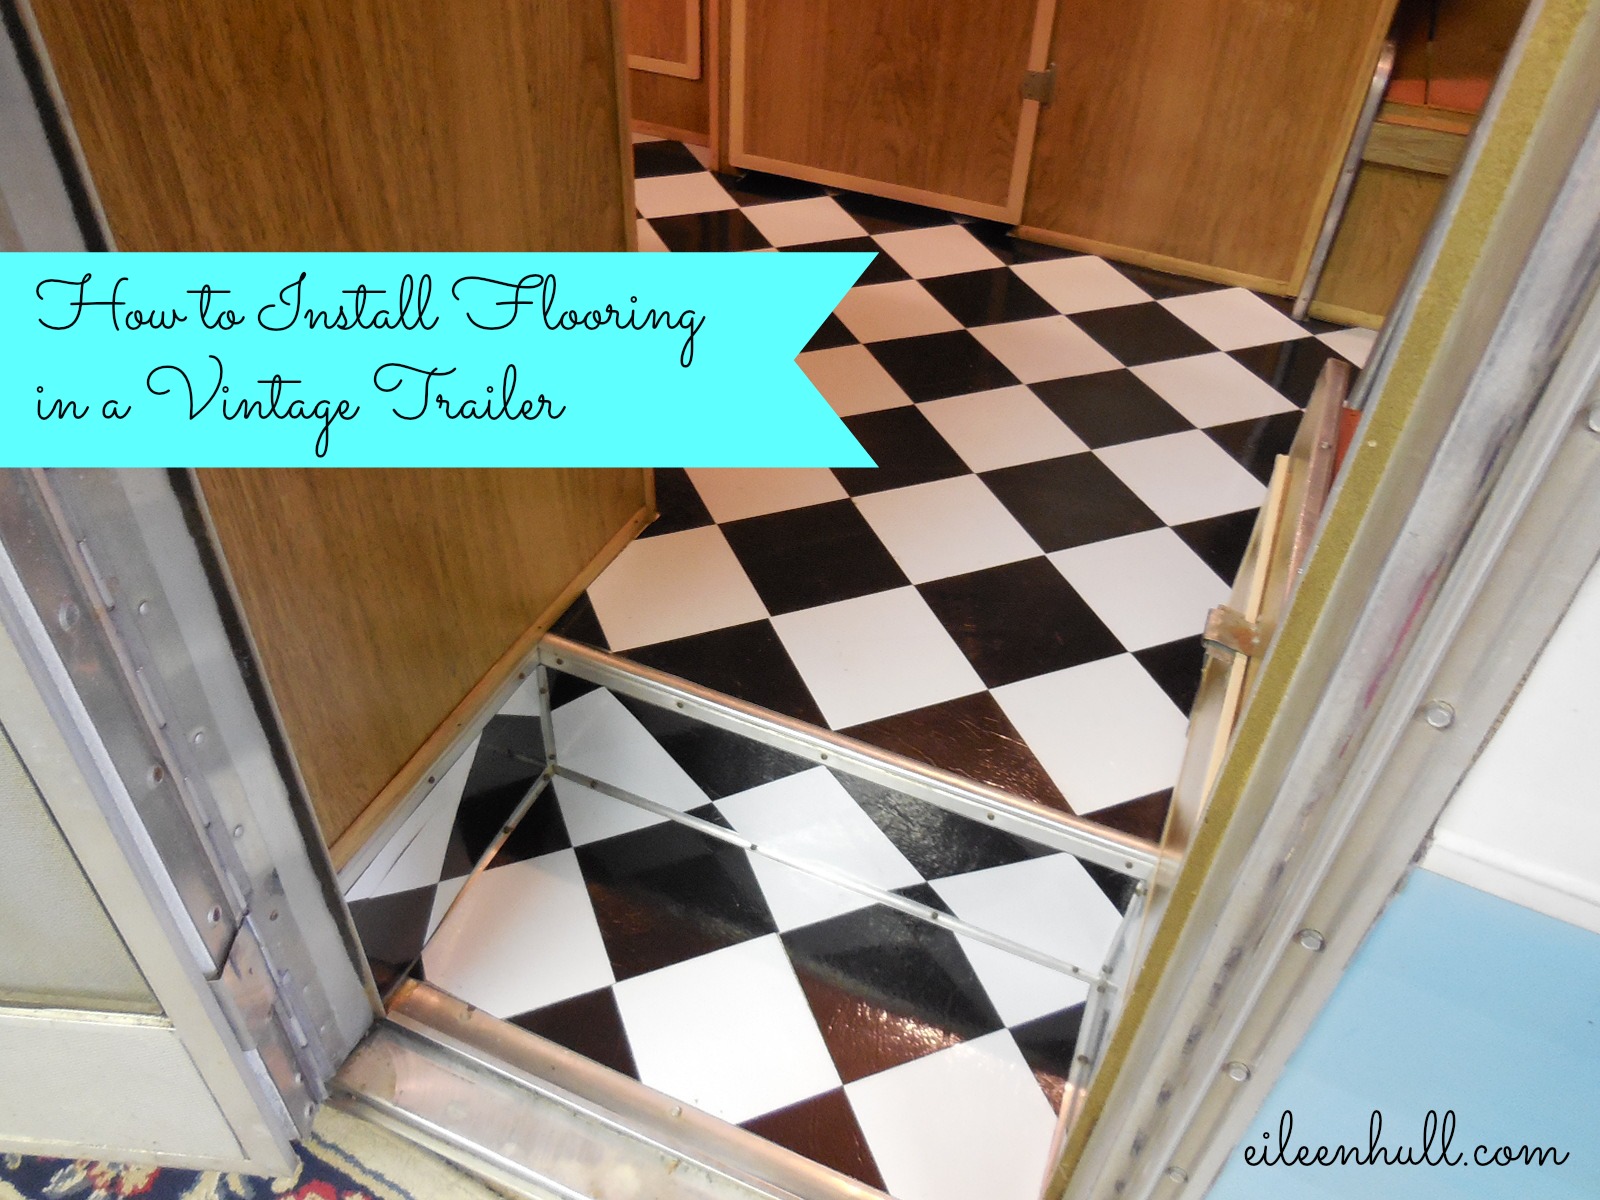 How To Install Flooring In A Vintage Trailer Eileen Hull